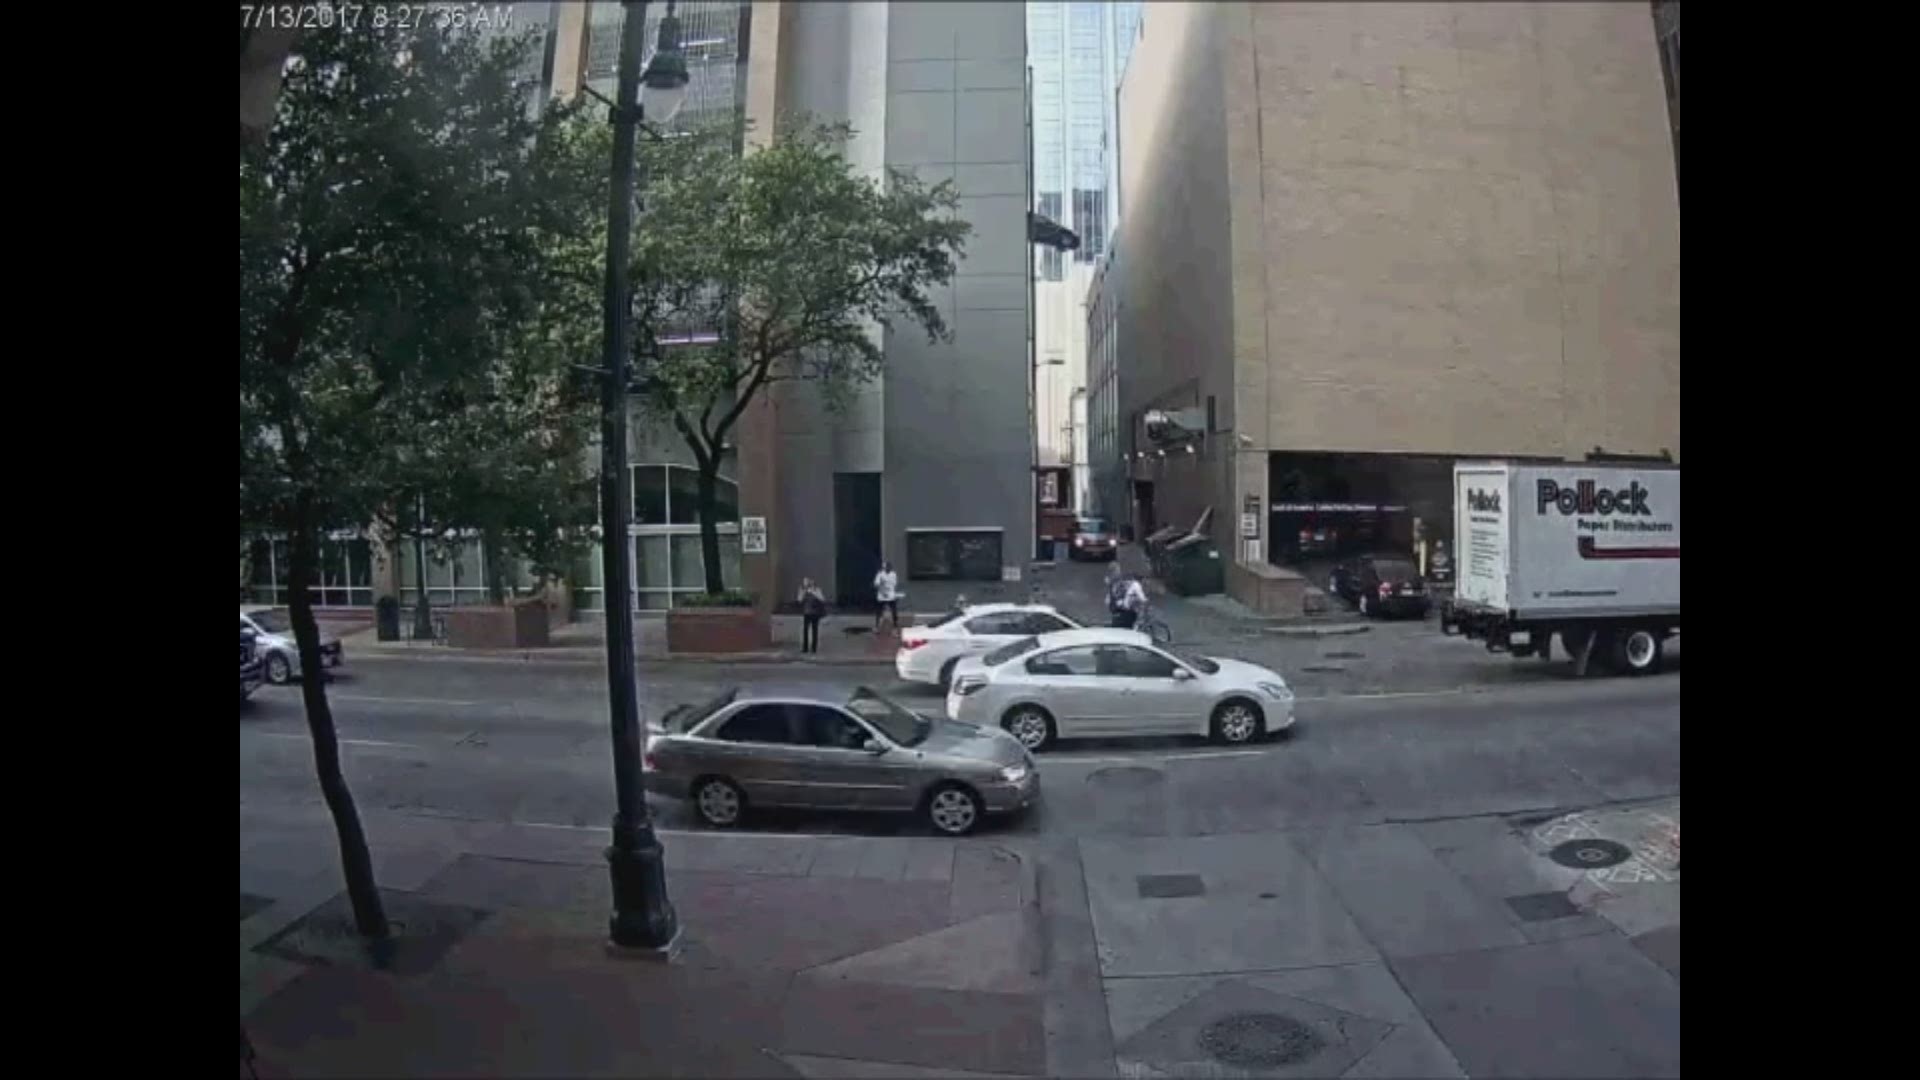 The car plunged seven stories in the 2017 incident.